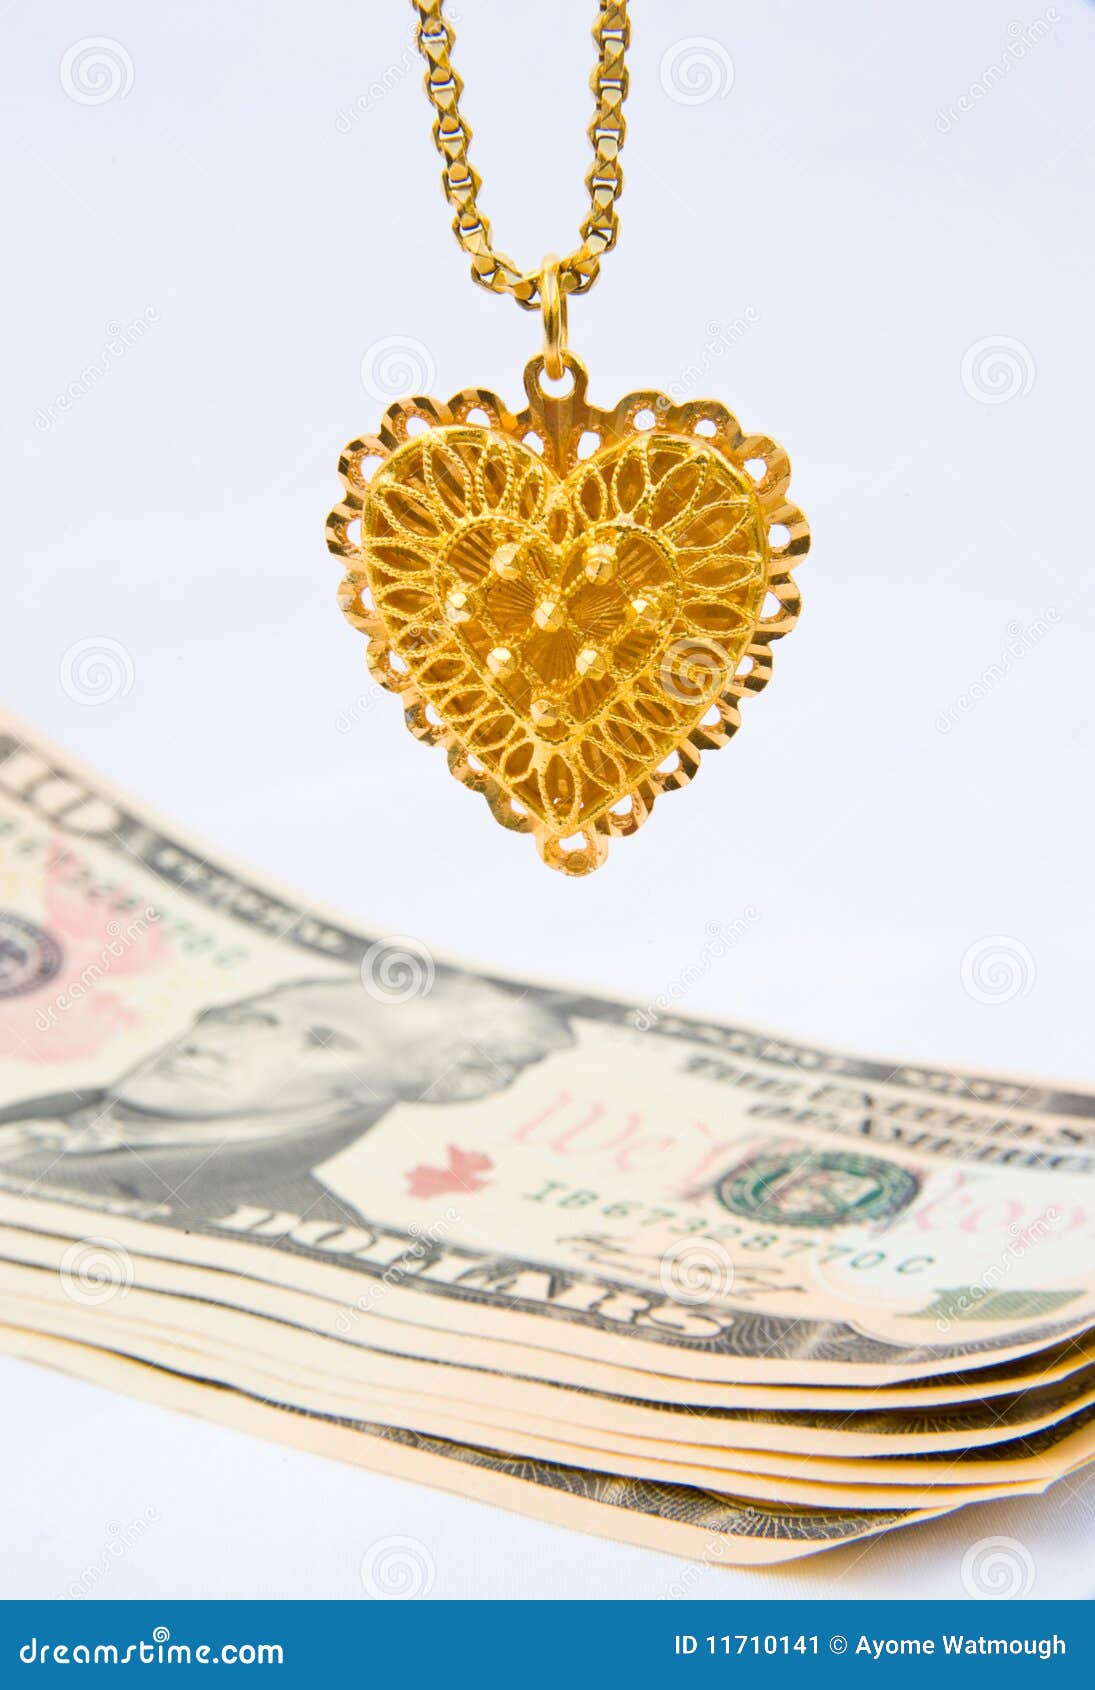 selling gold jewelery for cash.